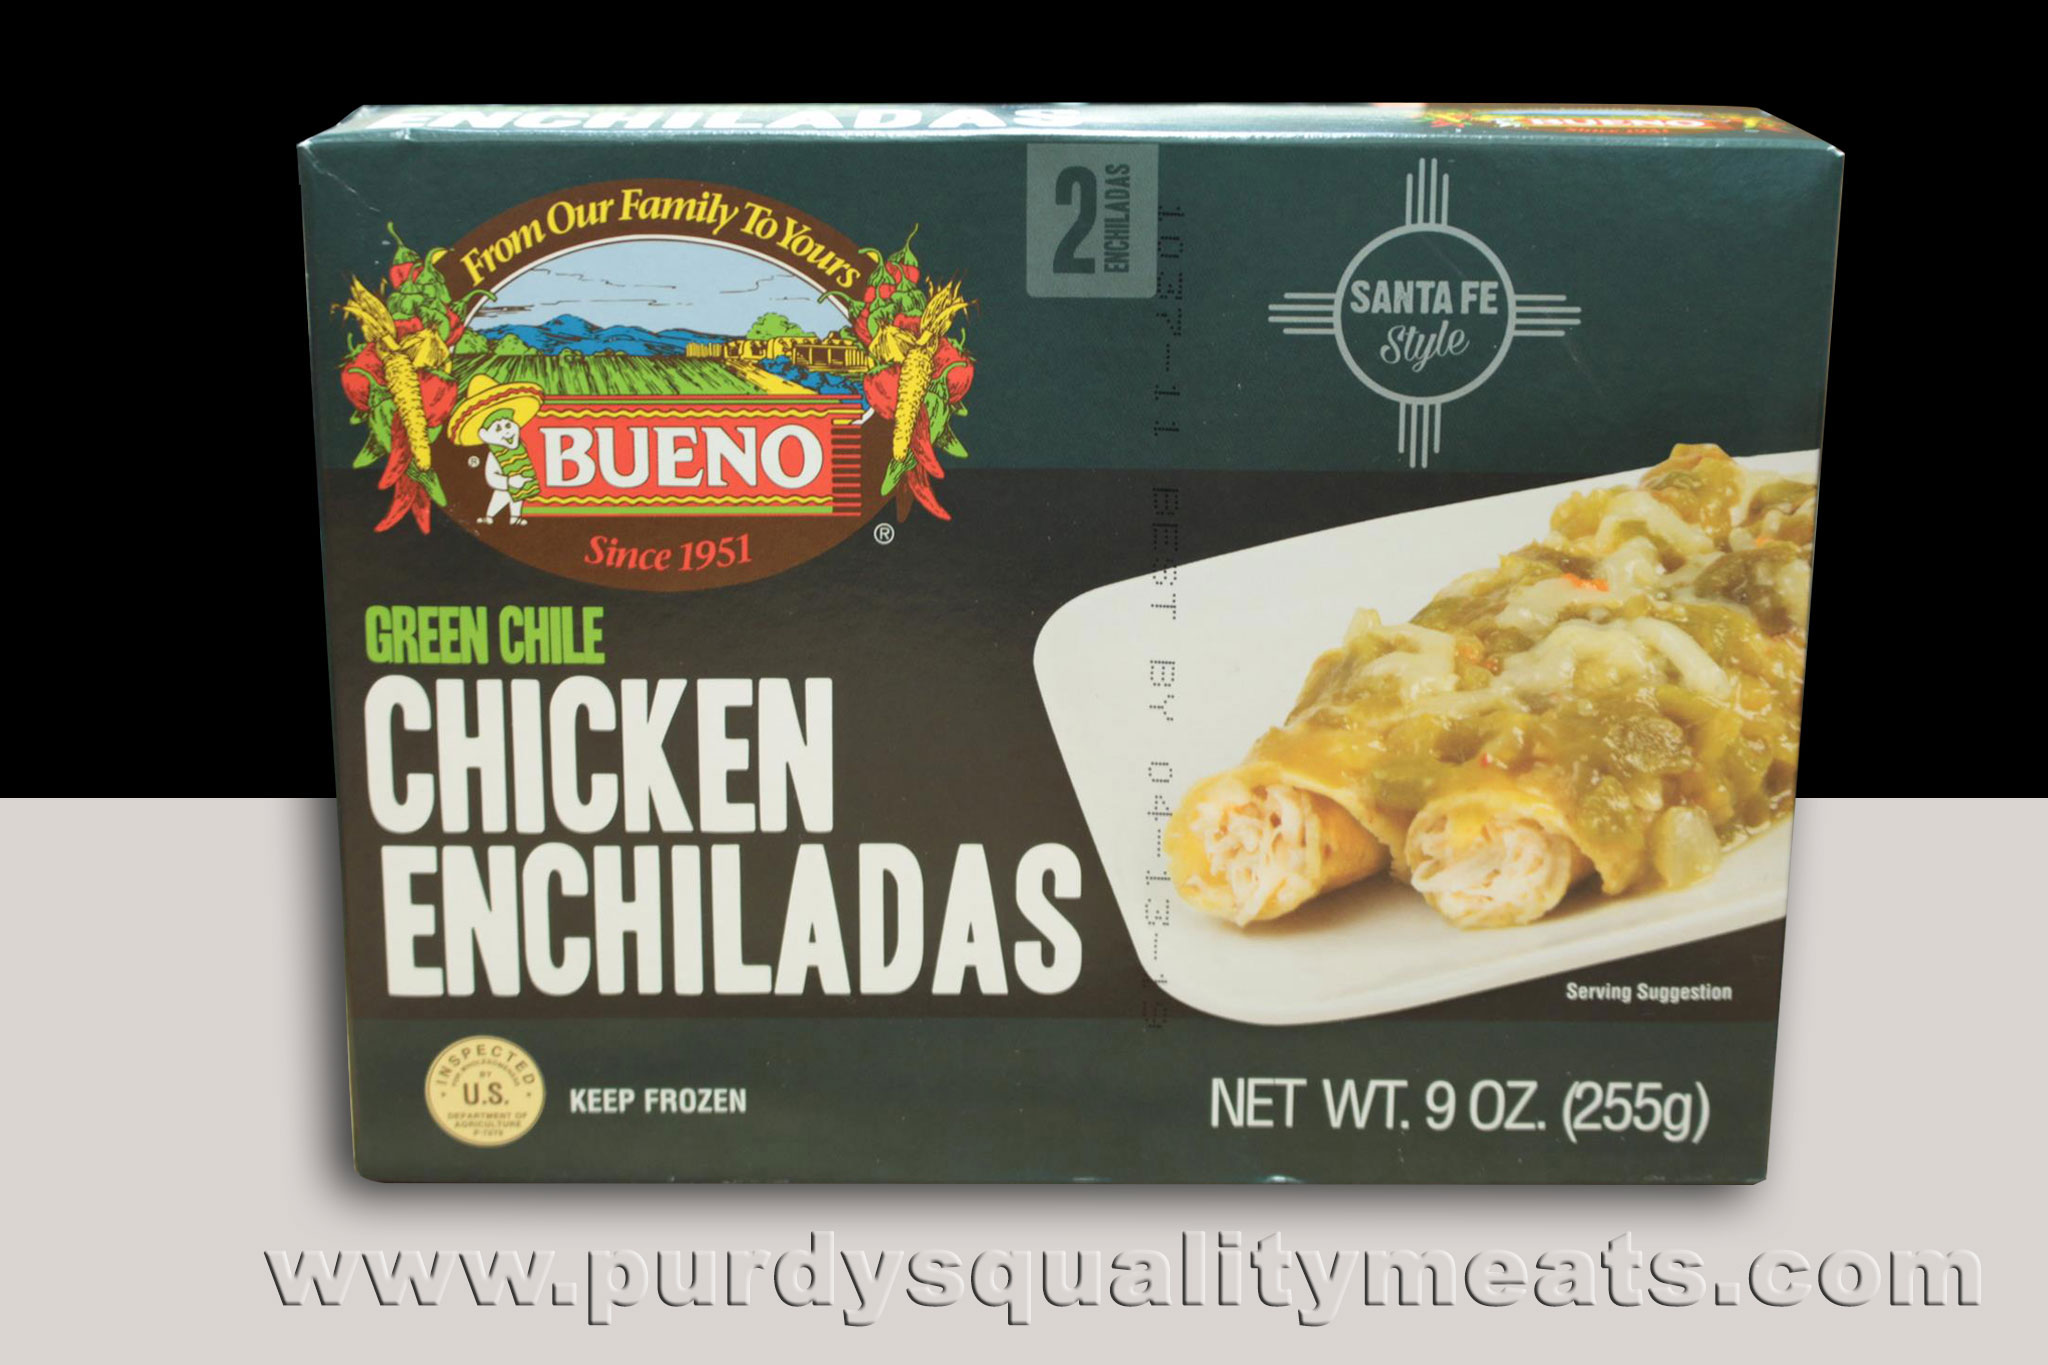 This image icon displays the Purdy's Quality Meats Green Chile Chicken Enchiladas image